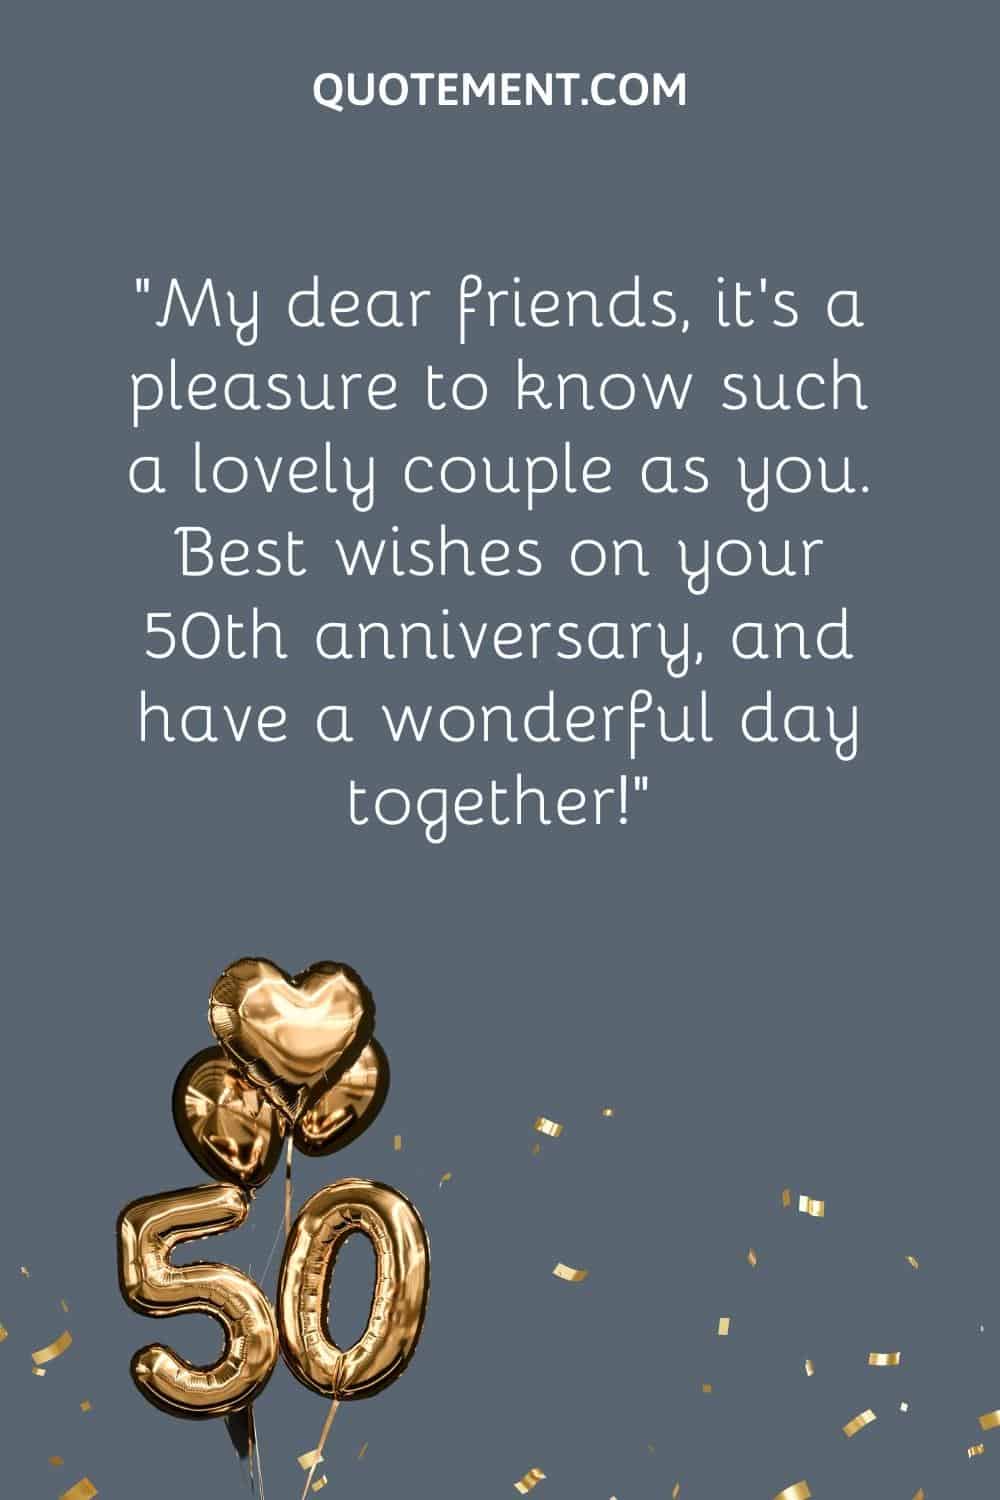 “My dear friends, it’s a pleasure to know such a lovely couple as you. Best wishes on your 50th anniversary, and have a wonderful day together!”